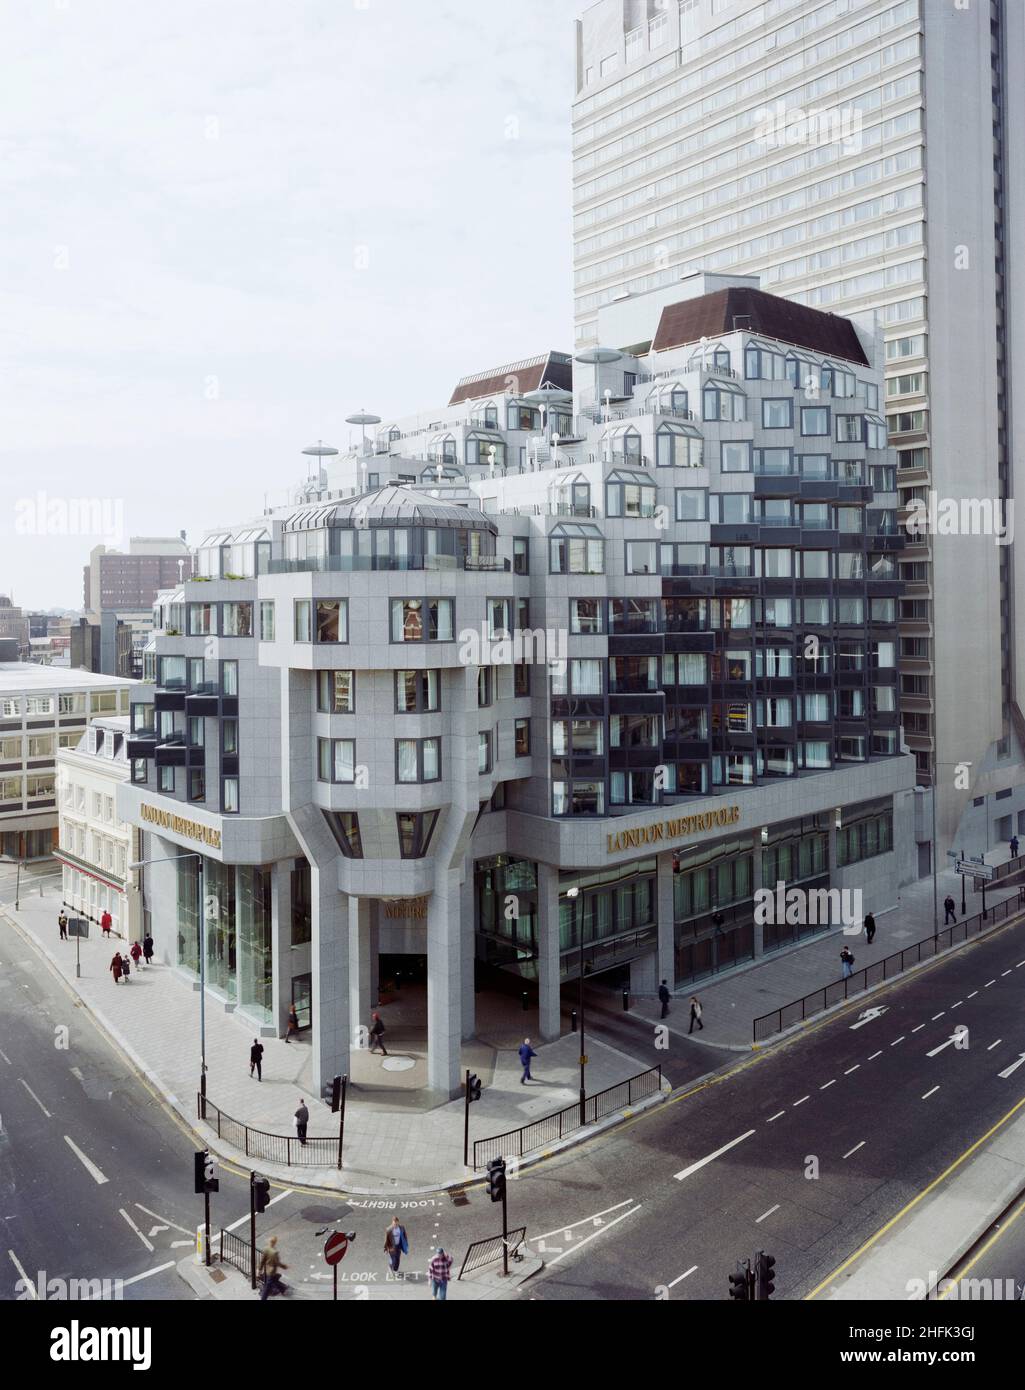 London Metropole Hotel, Edgware Road, City of Westminster, London, 19/03/1992. An elevated view of the completed extension to the Metropole Hotel, London.  Looking north west from the corner of Edgware Road and Chapel Street. Stock Photo